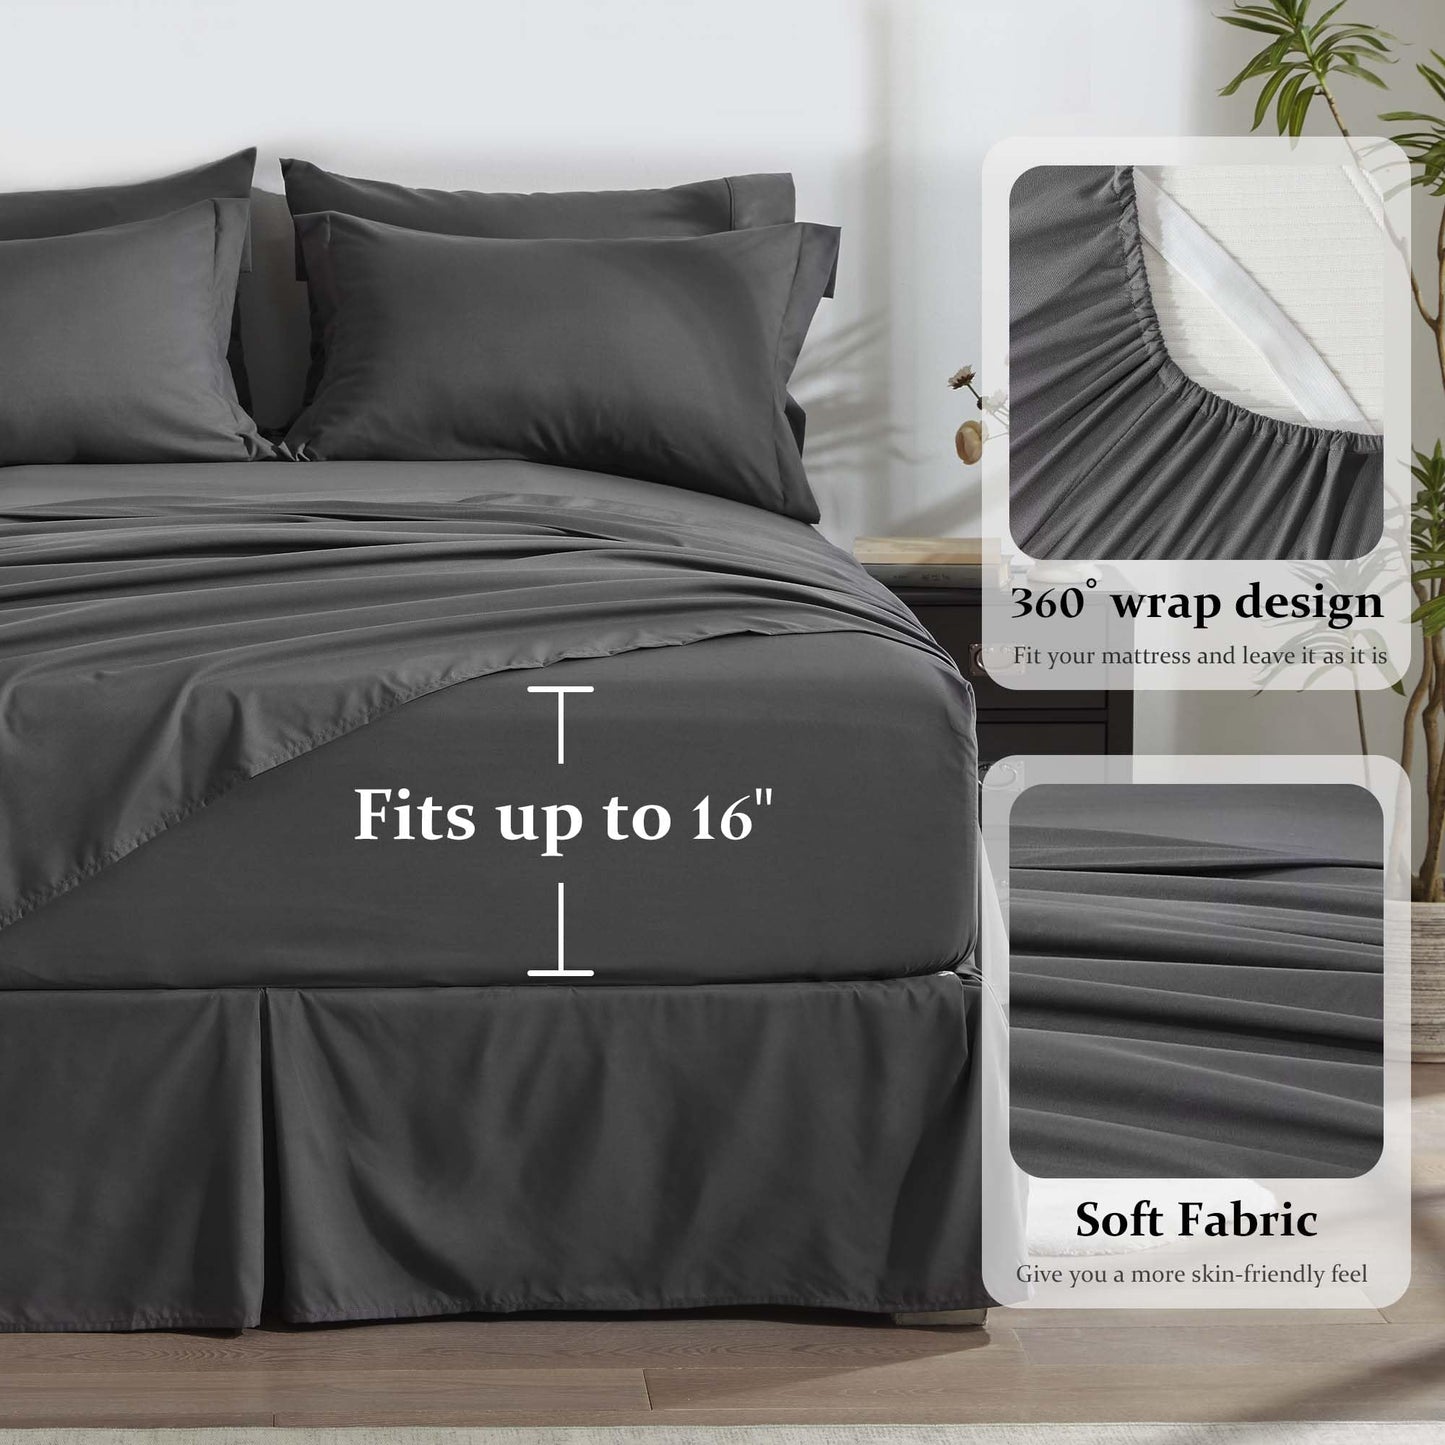 Newspin King Bed in a Bag 8 Pieces Comforter Set, Dark Grey All Season Bed Set, King Bedding Sets with Comforter and Sheets, Pillow Shams, Flat Sheet, Fitted Sheet, Pillowcases and Bed Skirt